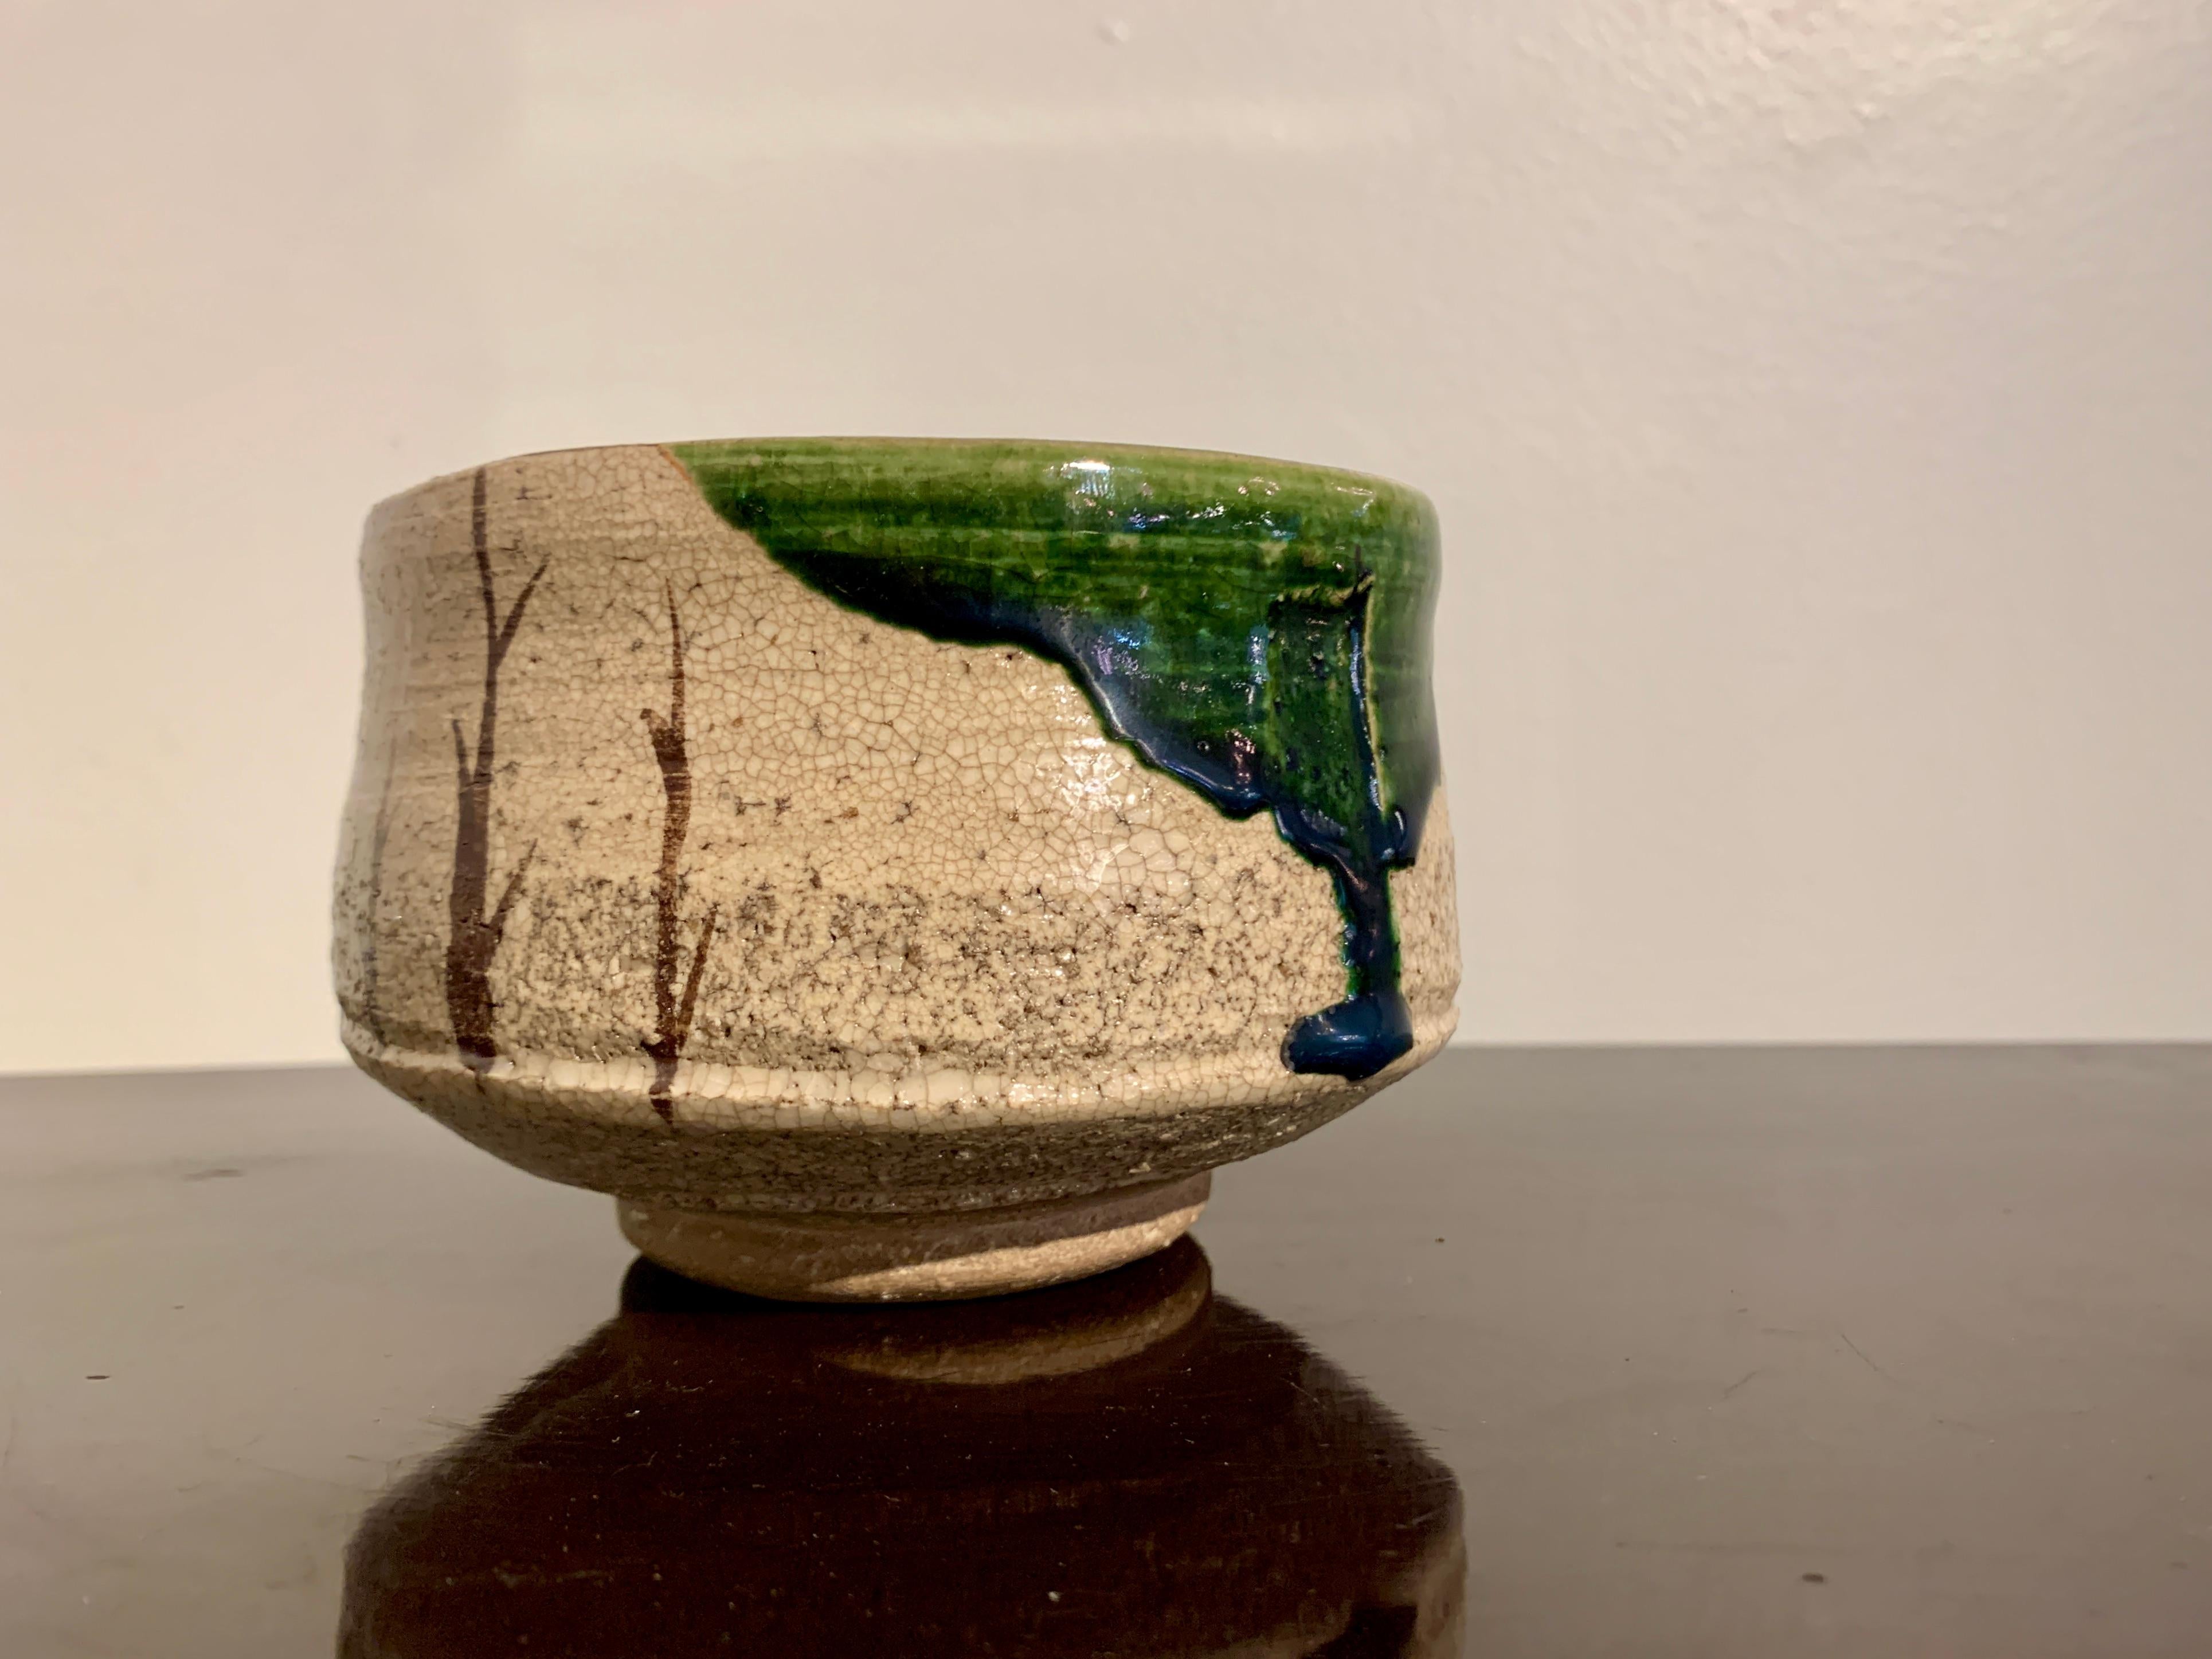 Vintage Japanese Oribe Ware Tea Bowl, Chawan, by Matsumoto Tetsuzan In Good Condition For Sale In Austin, TX